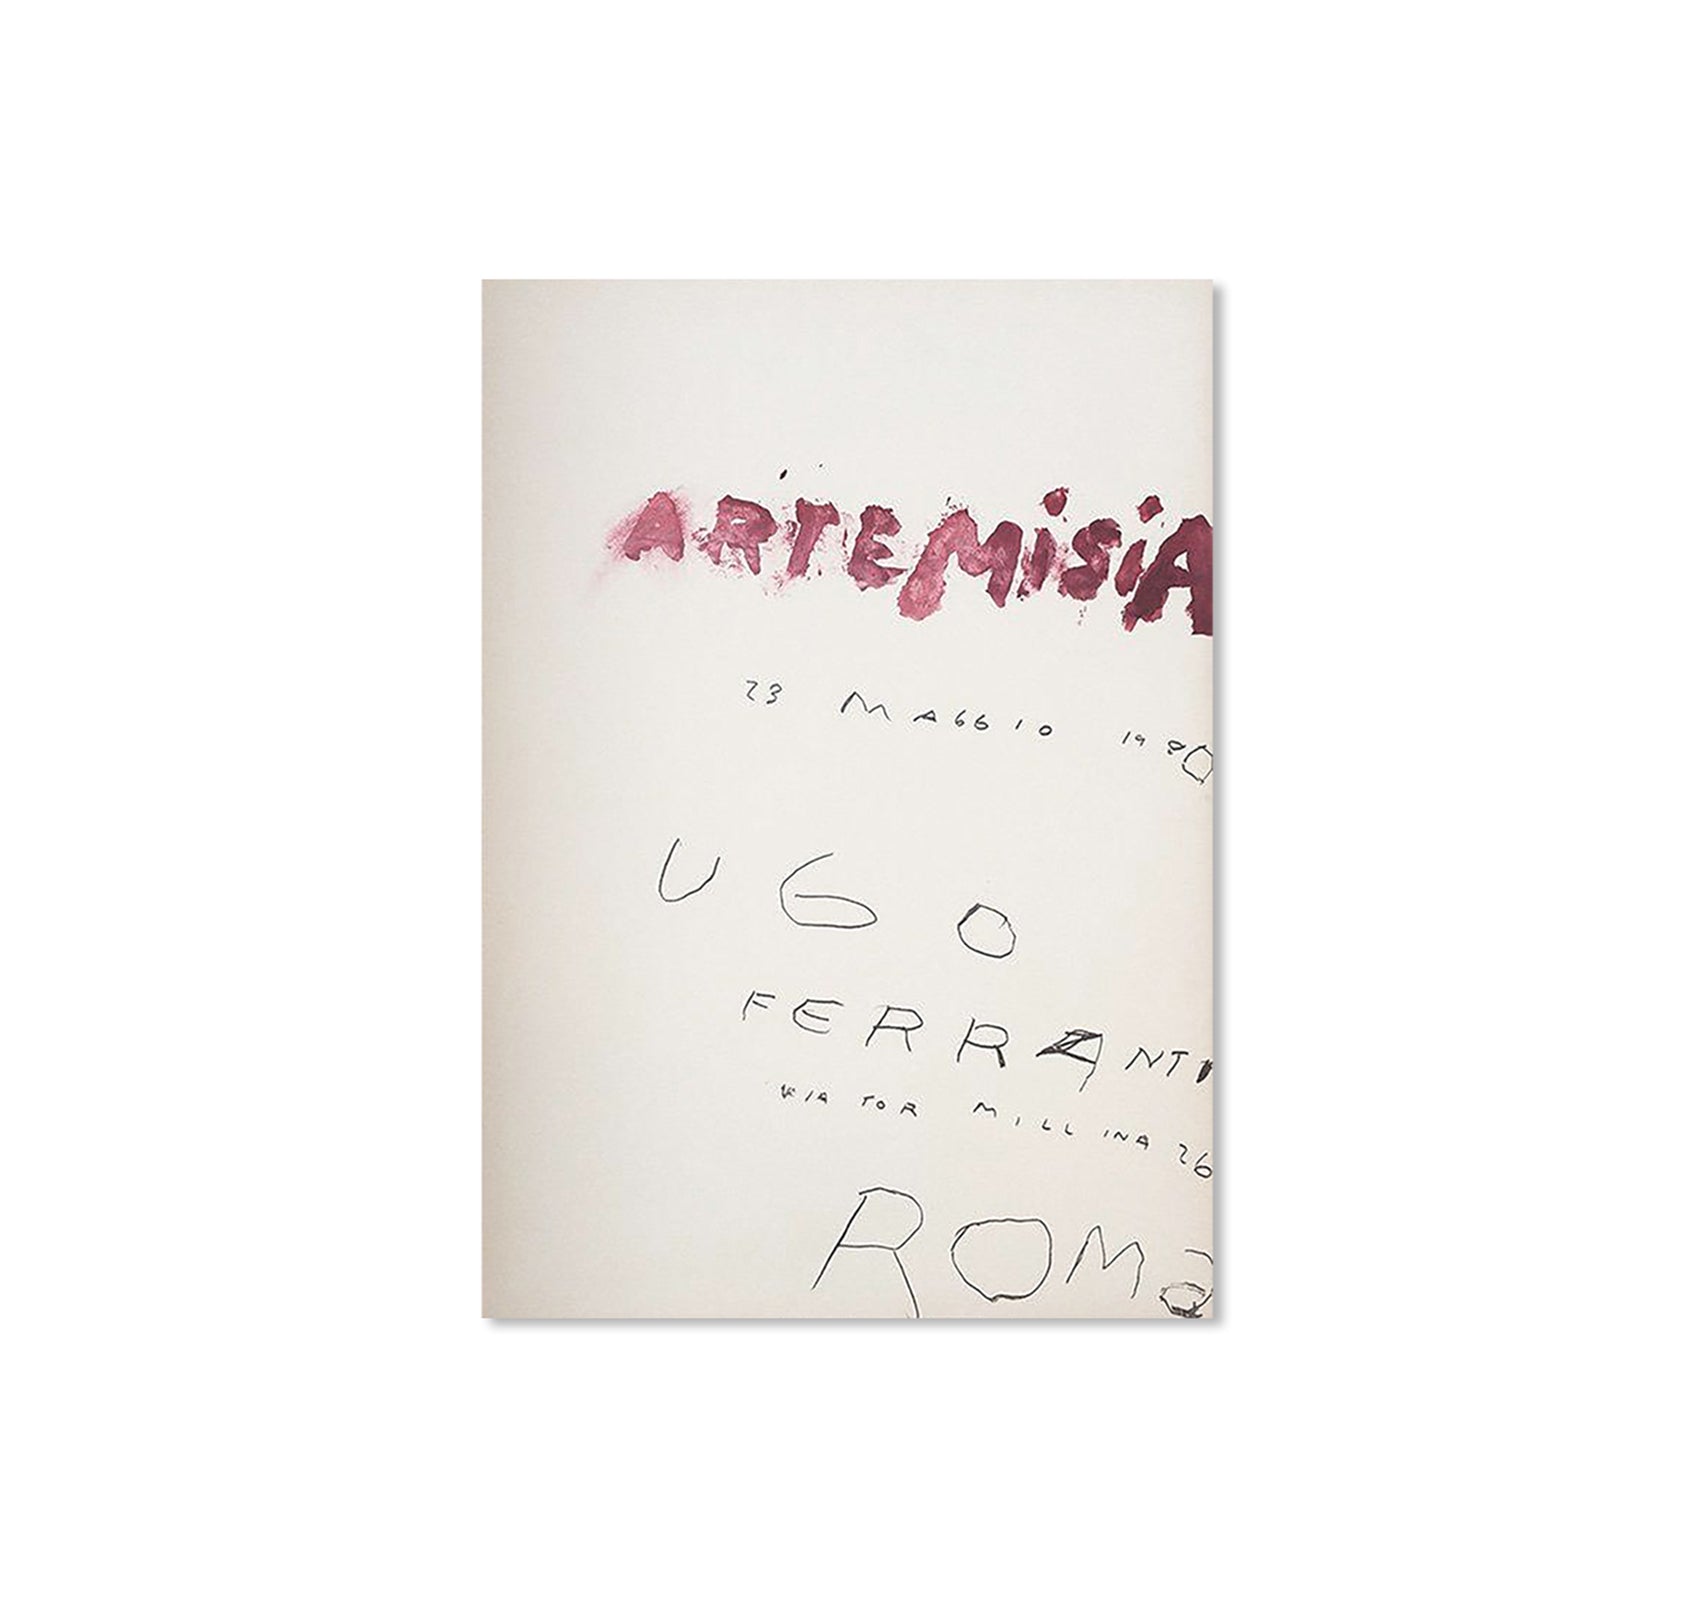 ARTEMISIA PRINT (1980) by Cy Twombly